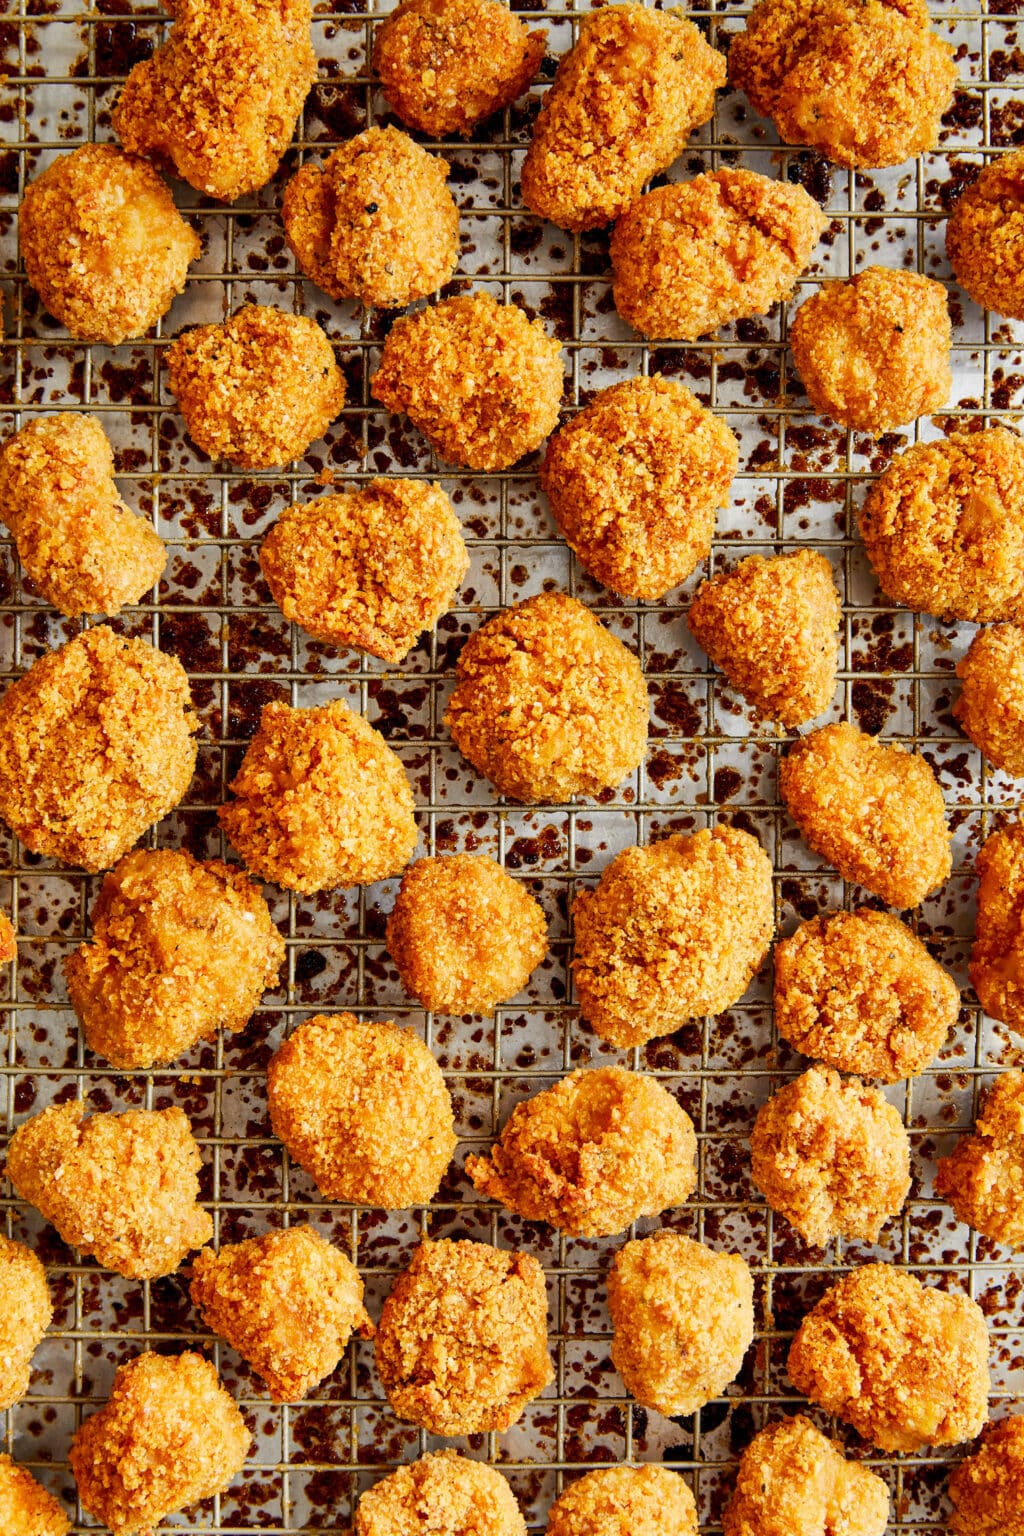 I'm still all in, though. And the fact that these are fully baked is even better. The trick? Using cornflake crumbs, bake these bad guys on a cooling rack, allowing them to crisp up all over.